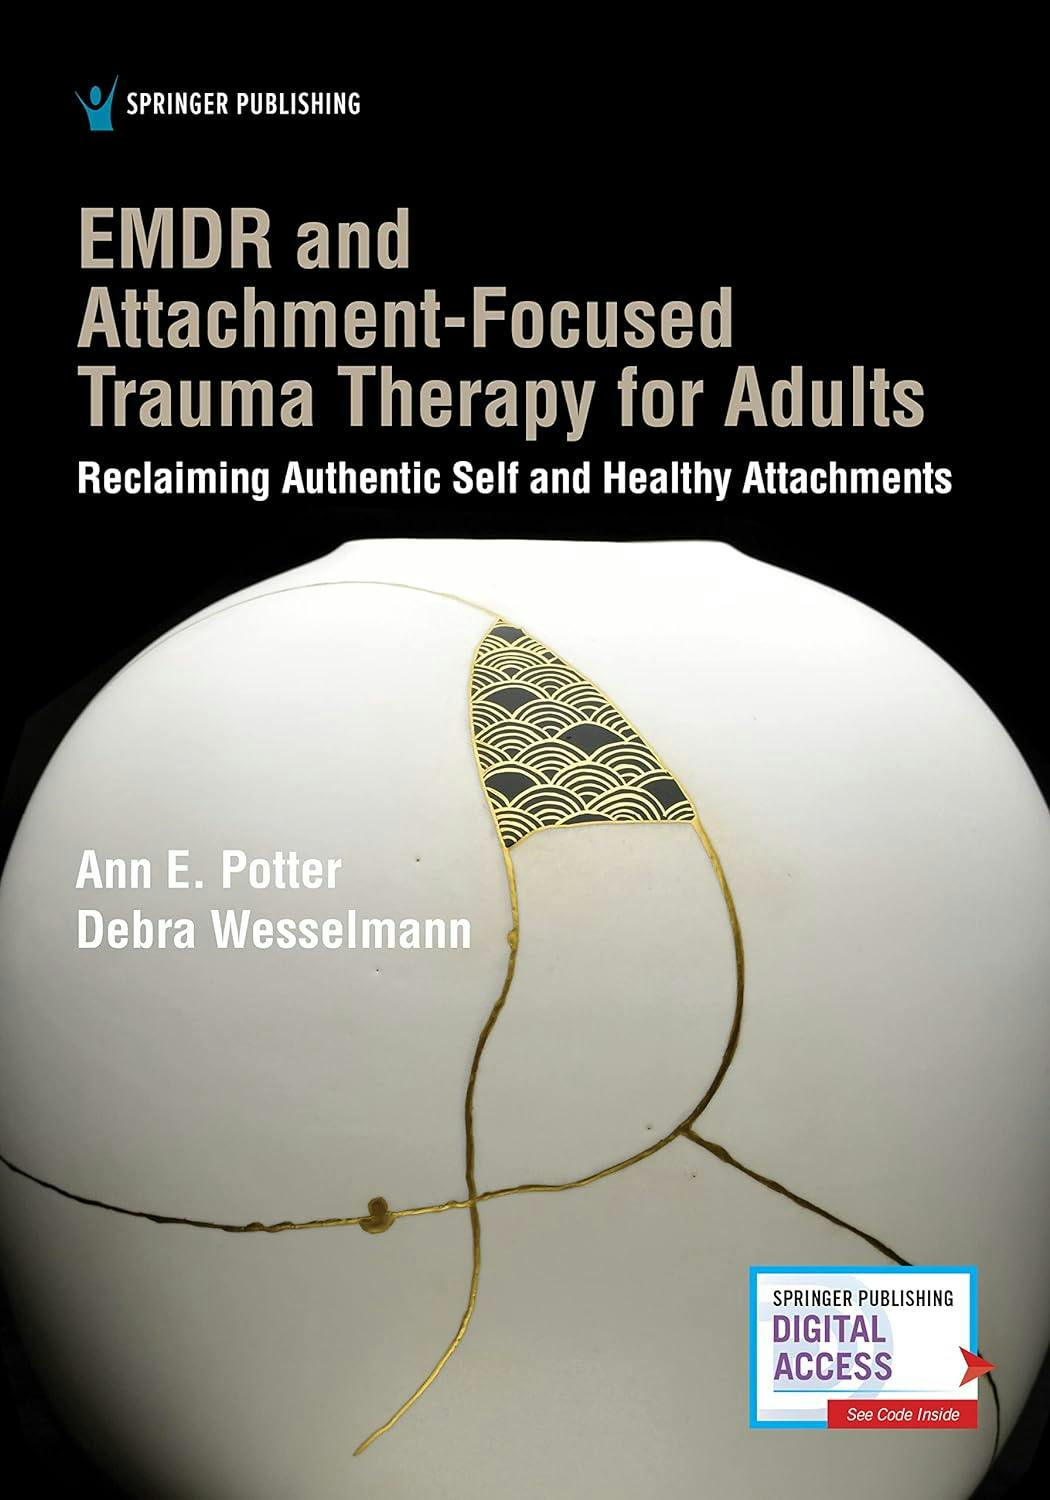 Book cover of "EMDR and Attachment-Focused Trauma Therapy for Adults"